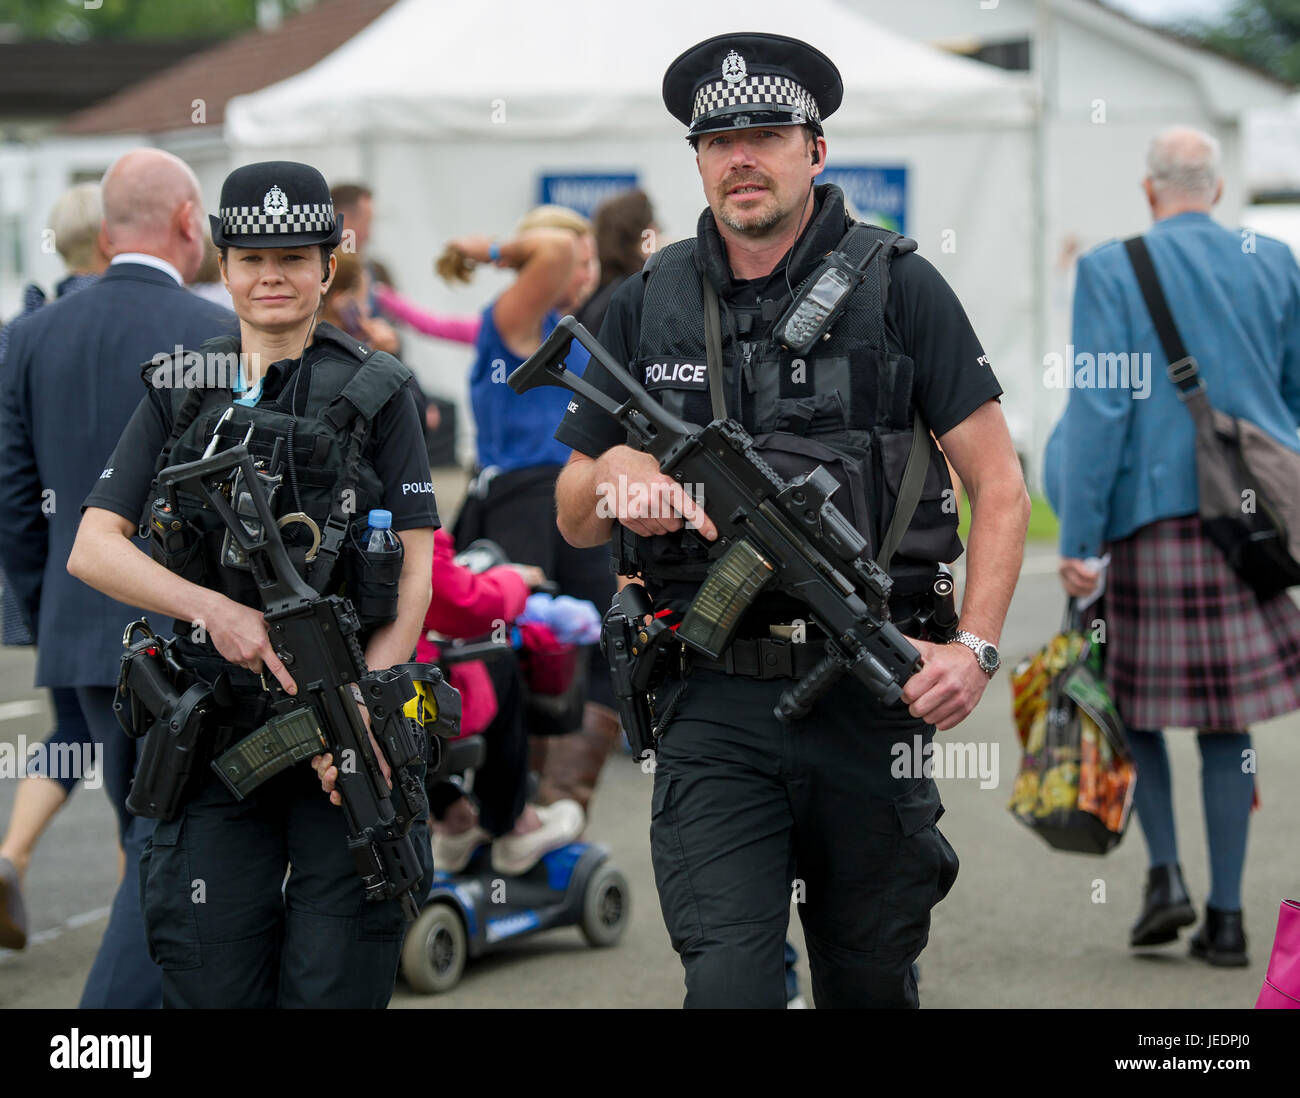 Armed police officers on patrol at the Royal Highland Show, Ingliston, Edinburgh. Stock Photo